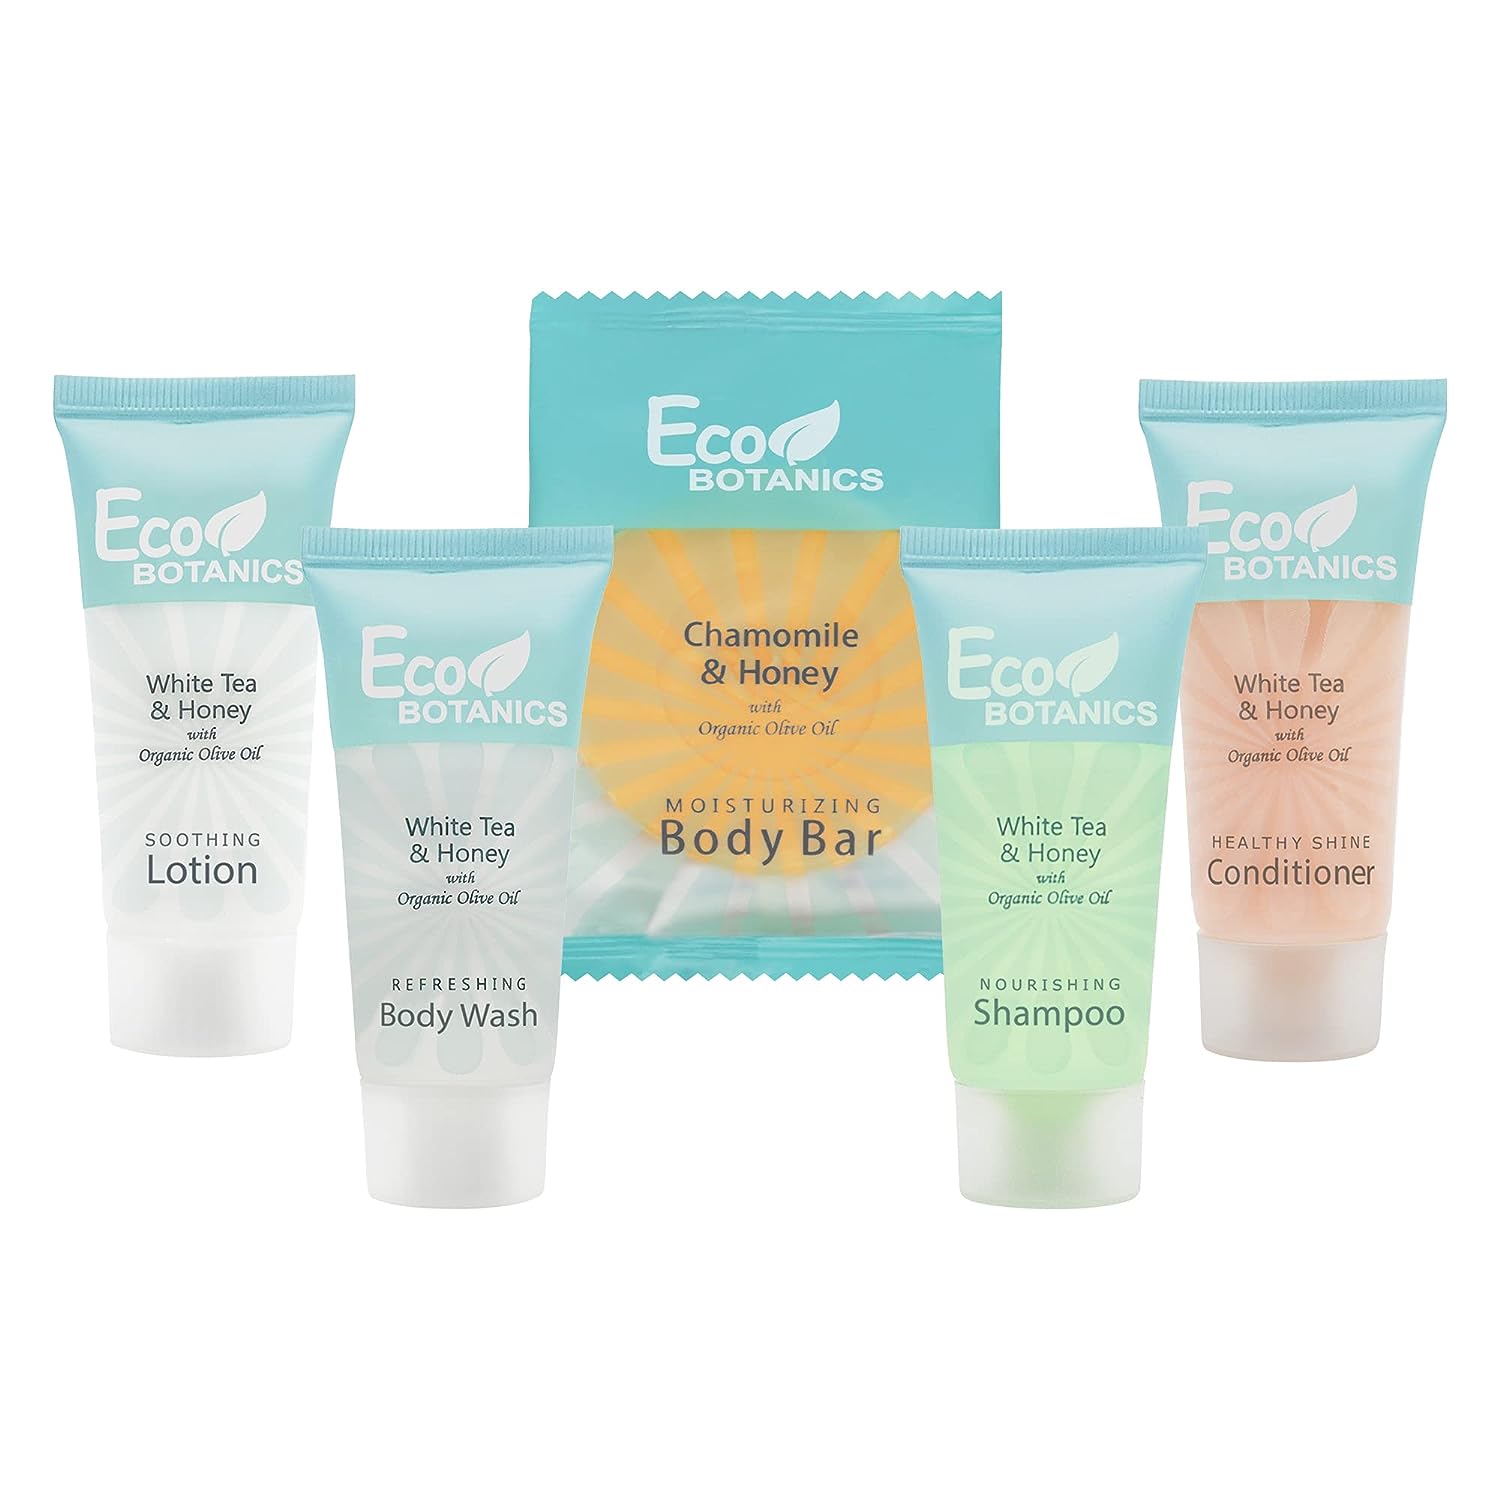 Terra Pure Eco Botanics Hotel Soaps and Toiletries Bulk Set | 1-Shoppe All-In-Kit Amenities for Hotels |0.85 Shampoo & Conditioner, Body Wash, Body Lotion & 0.89 Bar Soap Travel Size | 75 Pieces